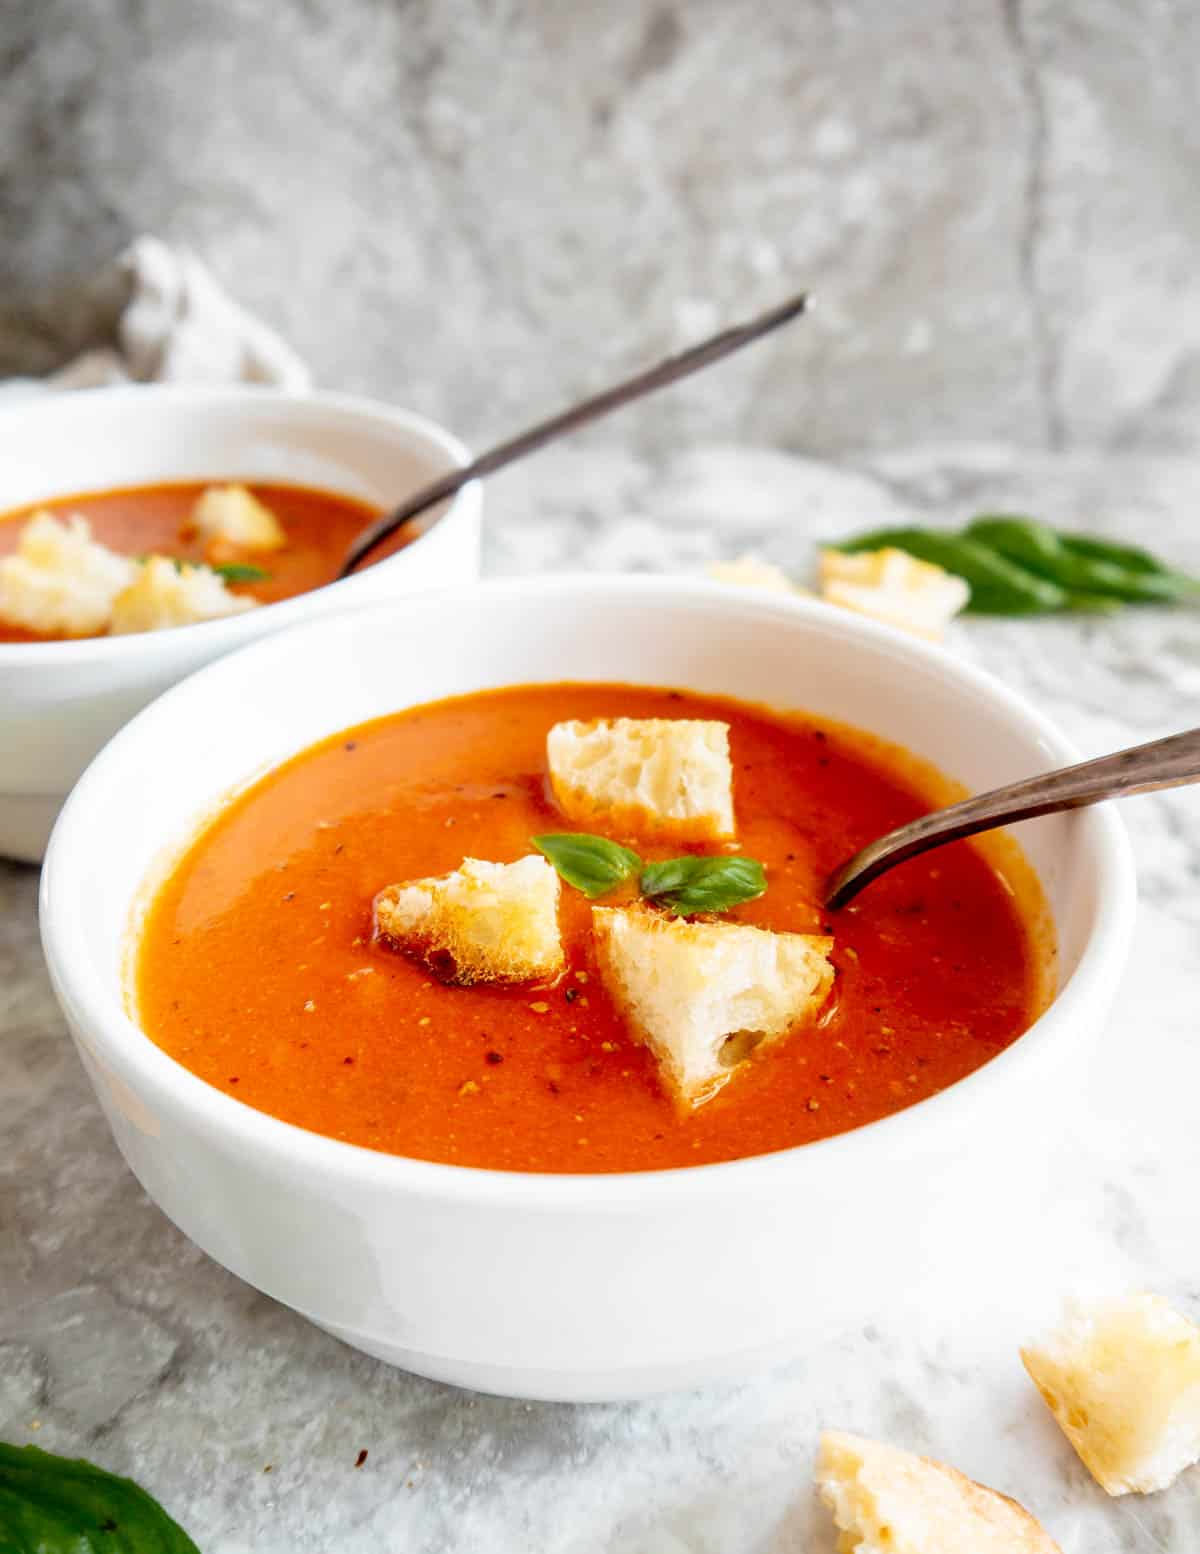 A bowl of tomato soup made from tomato sauce, topped in croutons.